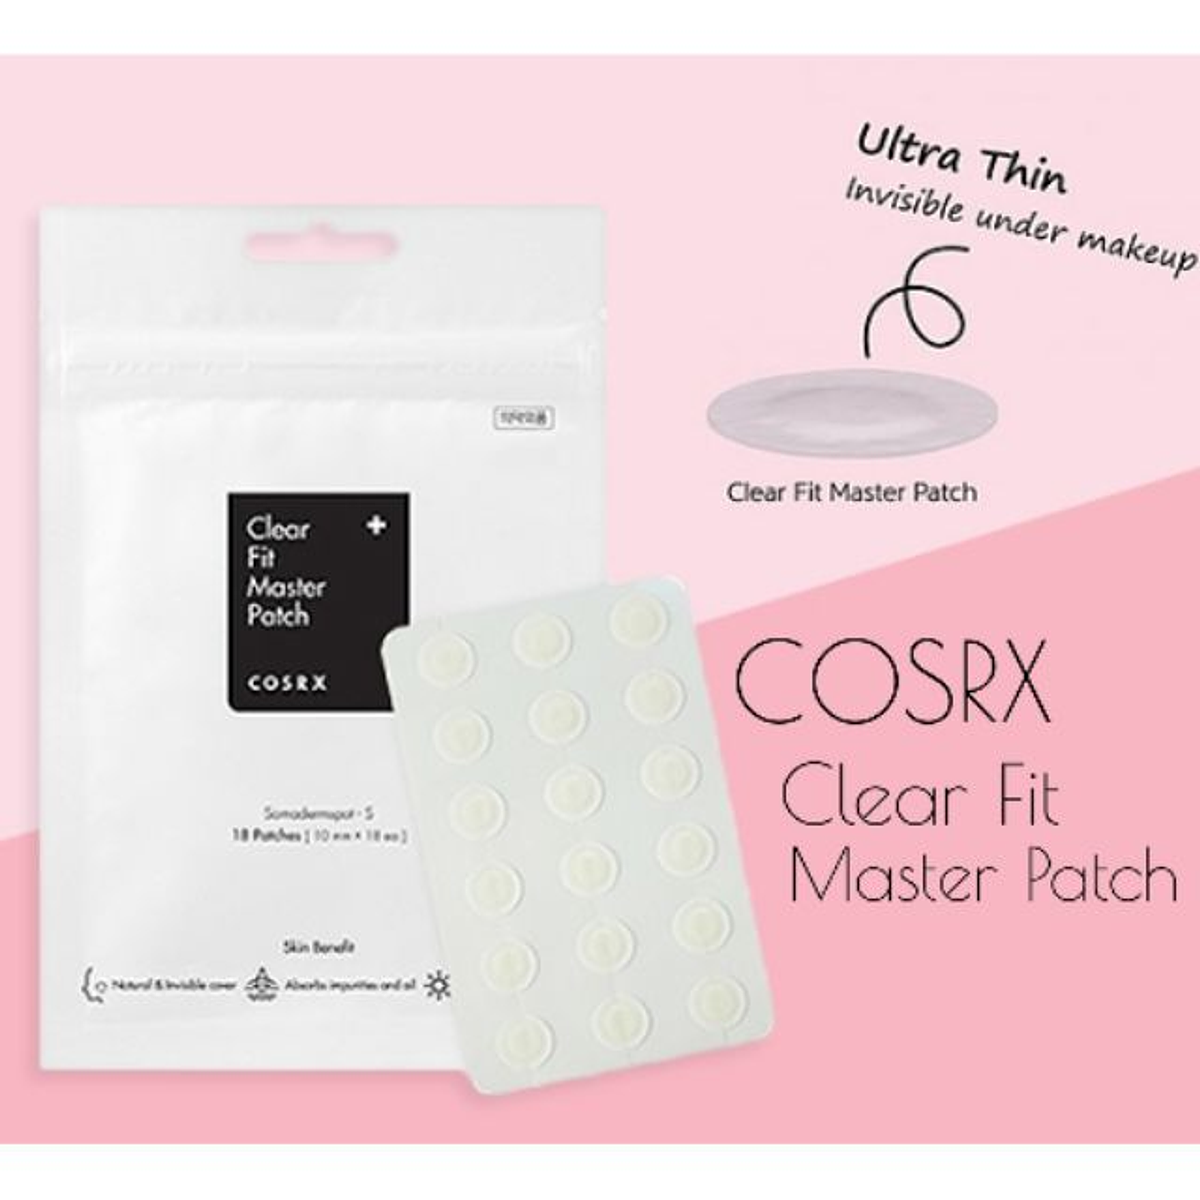 COSRX Clear Fit Master Patch. COSRX патчи от акне Clear Fit Master Patch. Наклейки от прыщей COSRX Clear Fit Master Patch. COSRX наклейки от прыщей Clear Fit Master Patch, 10мм*18шт. Clear patch